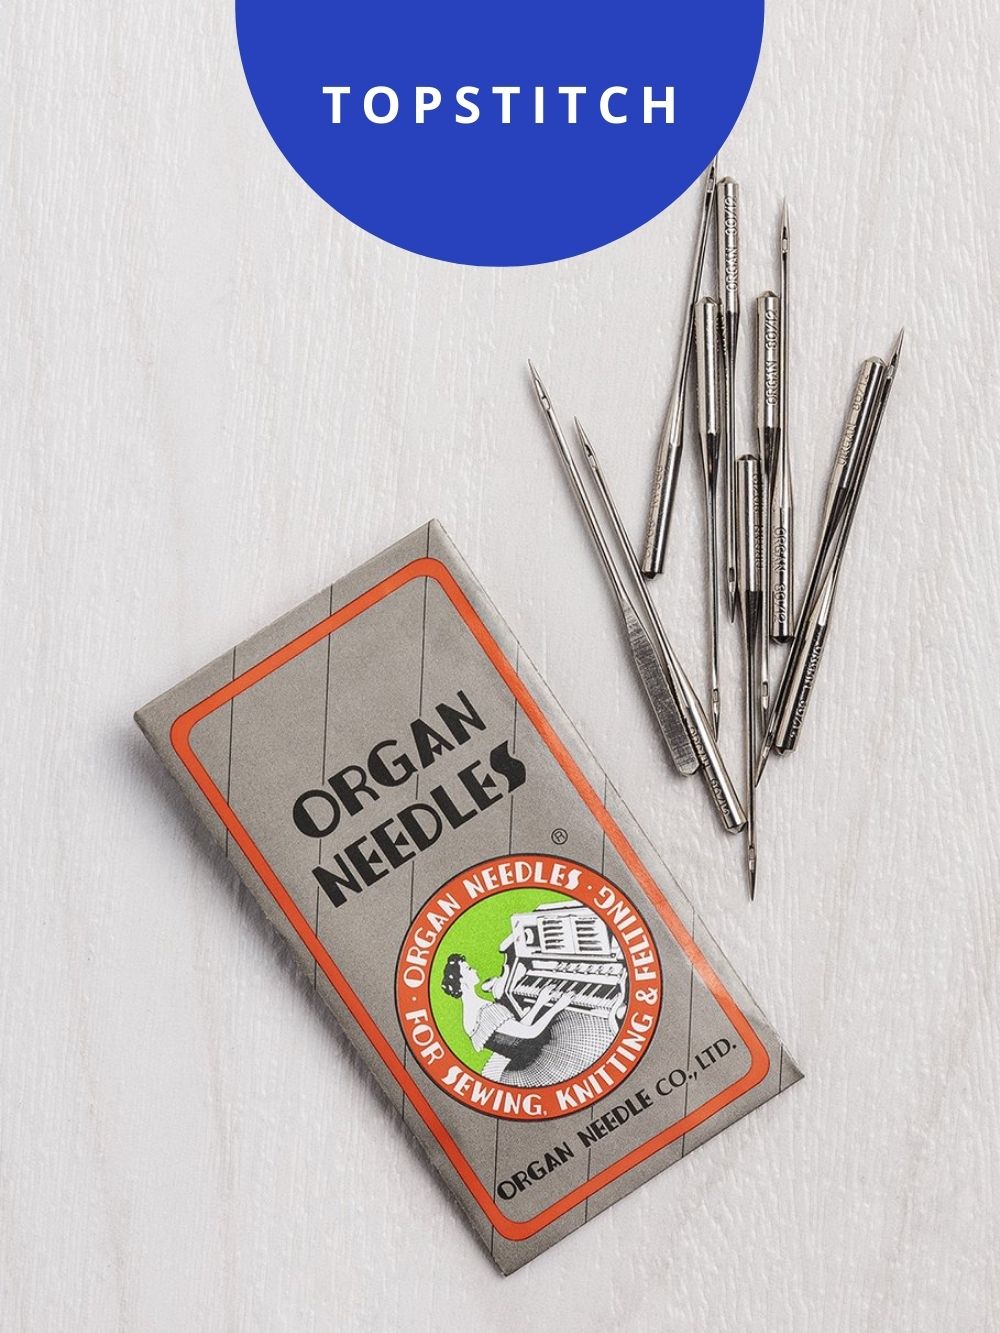 Organ Needles can be used for embroidery or domestic sewing machines.